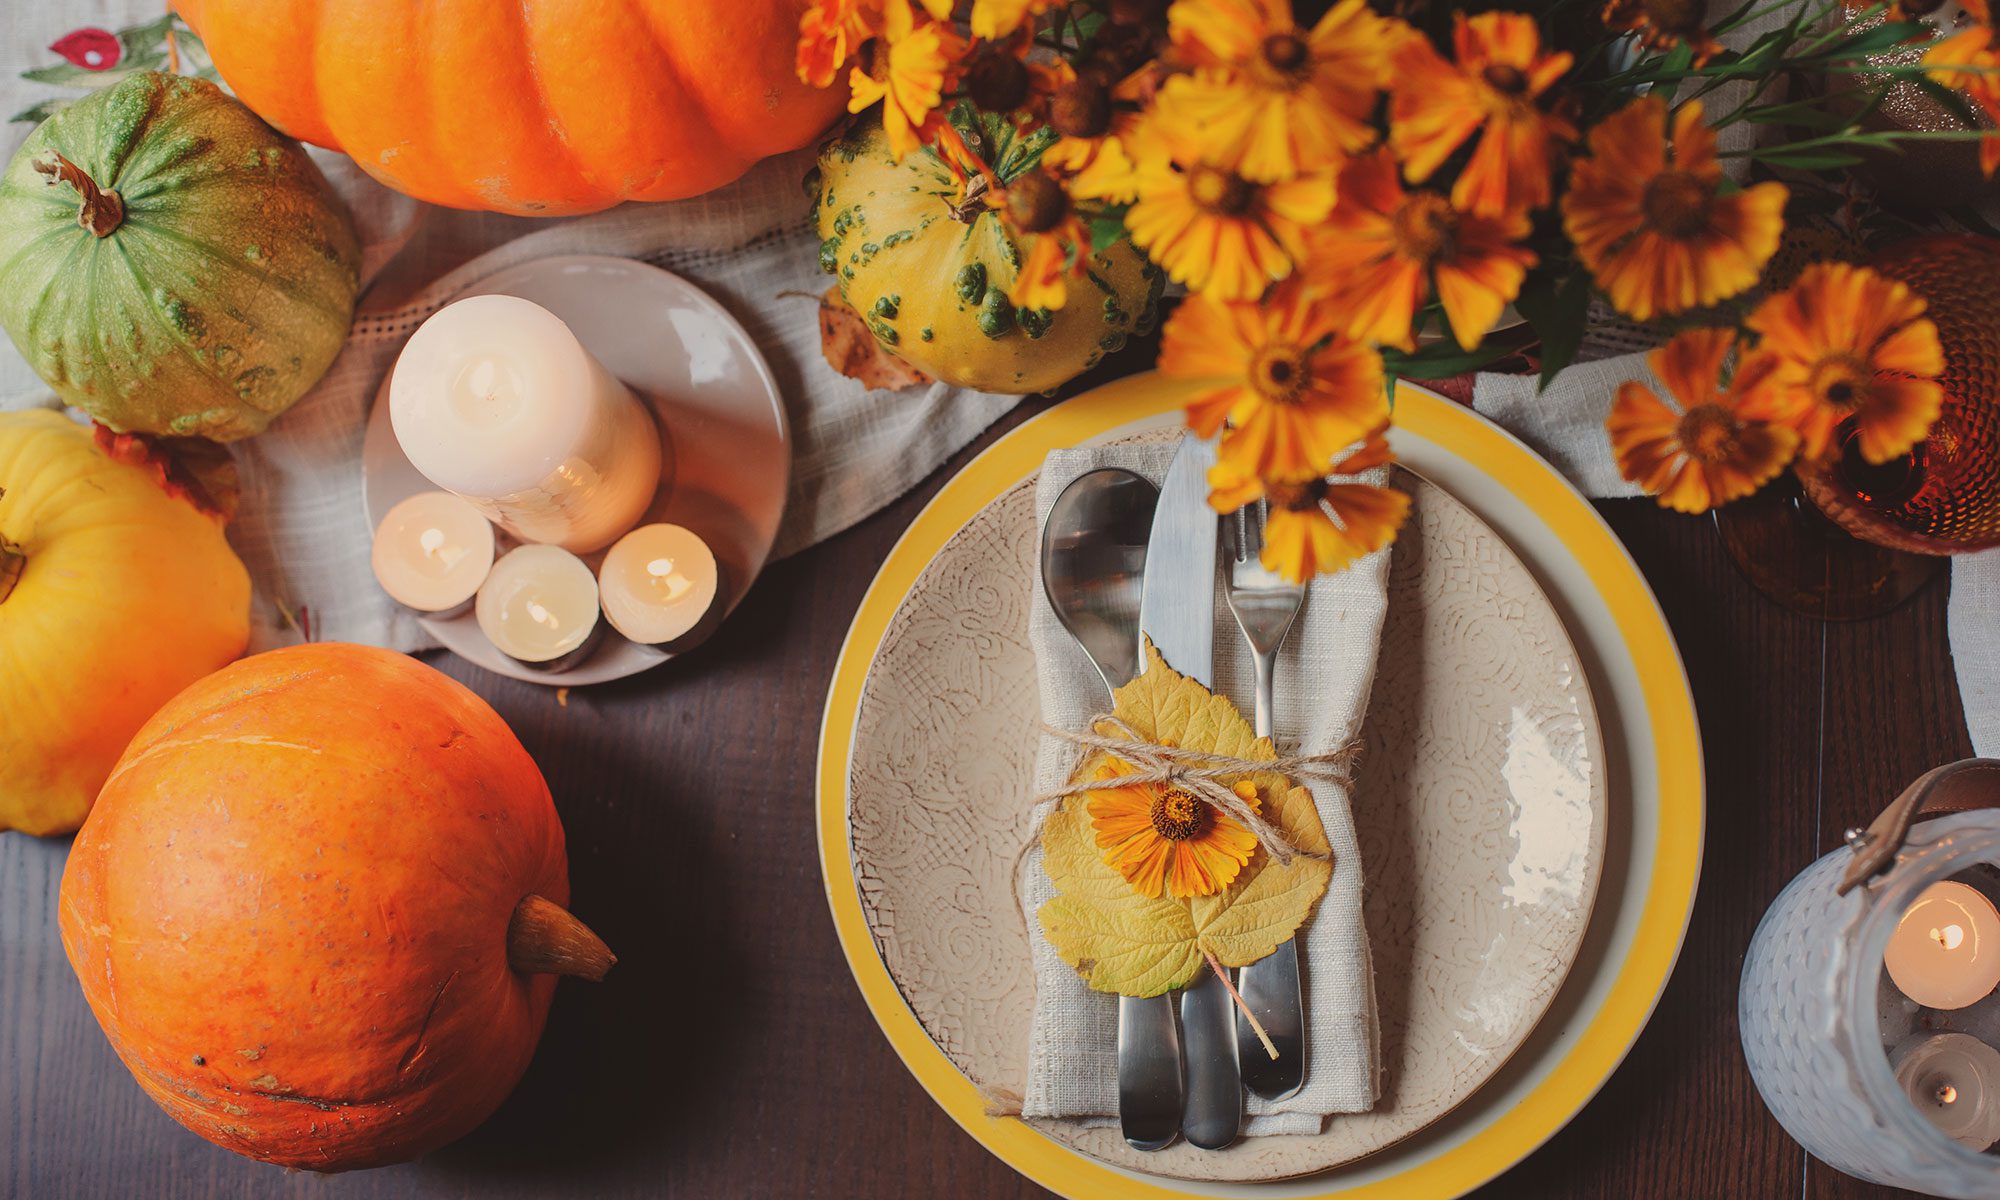 Top five food-and-drink pairings for Thanksgiving - The Spirits Business